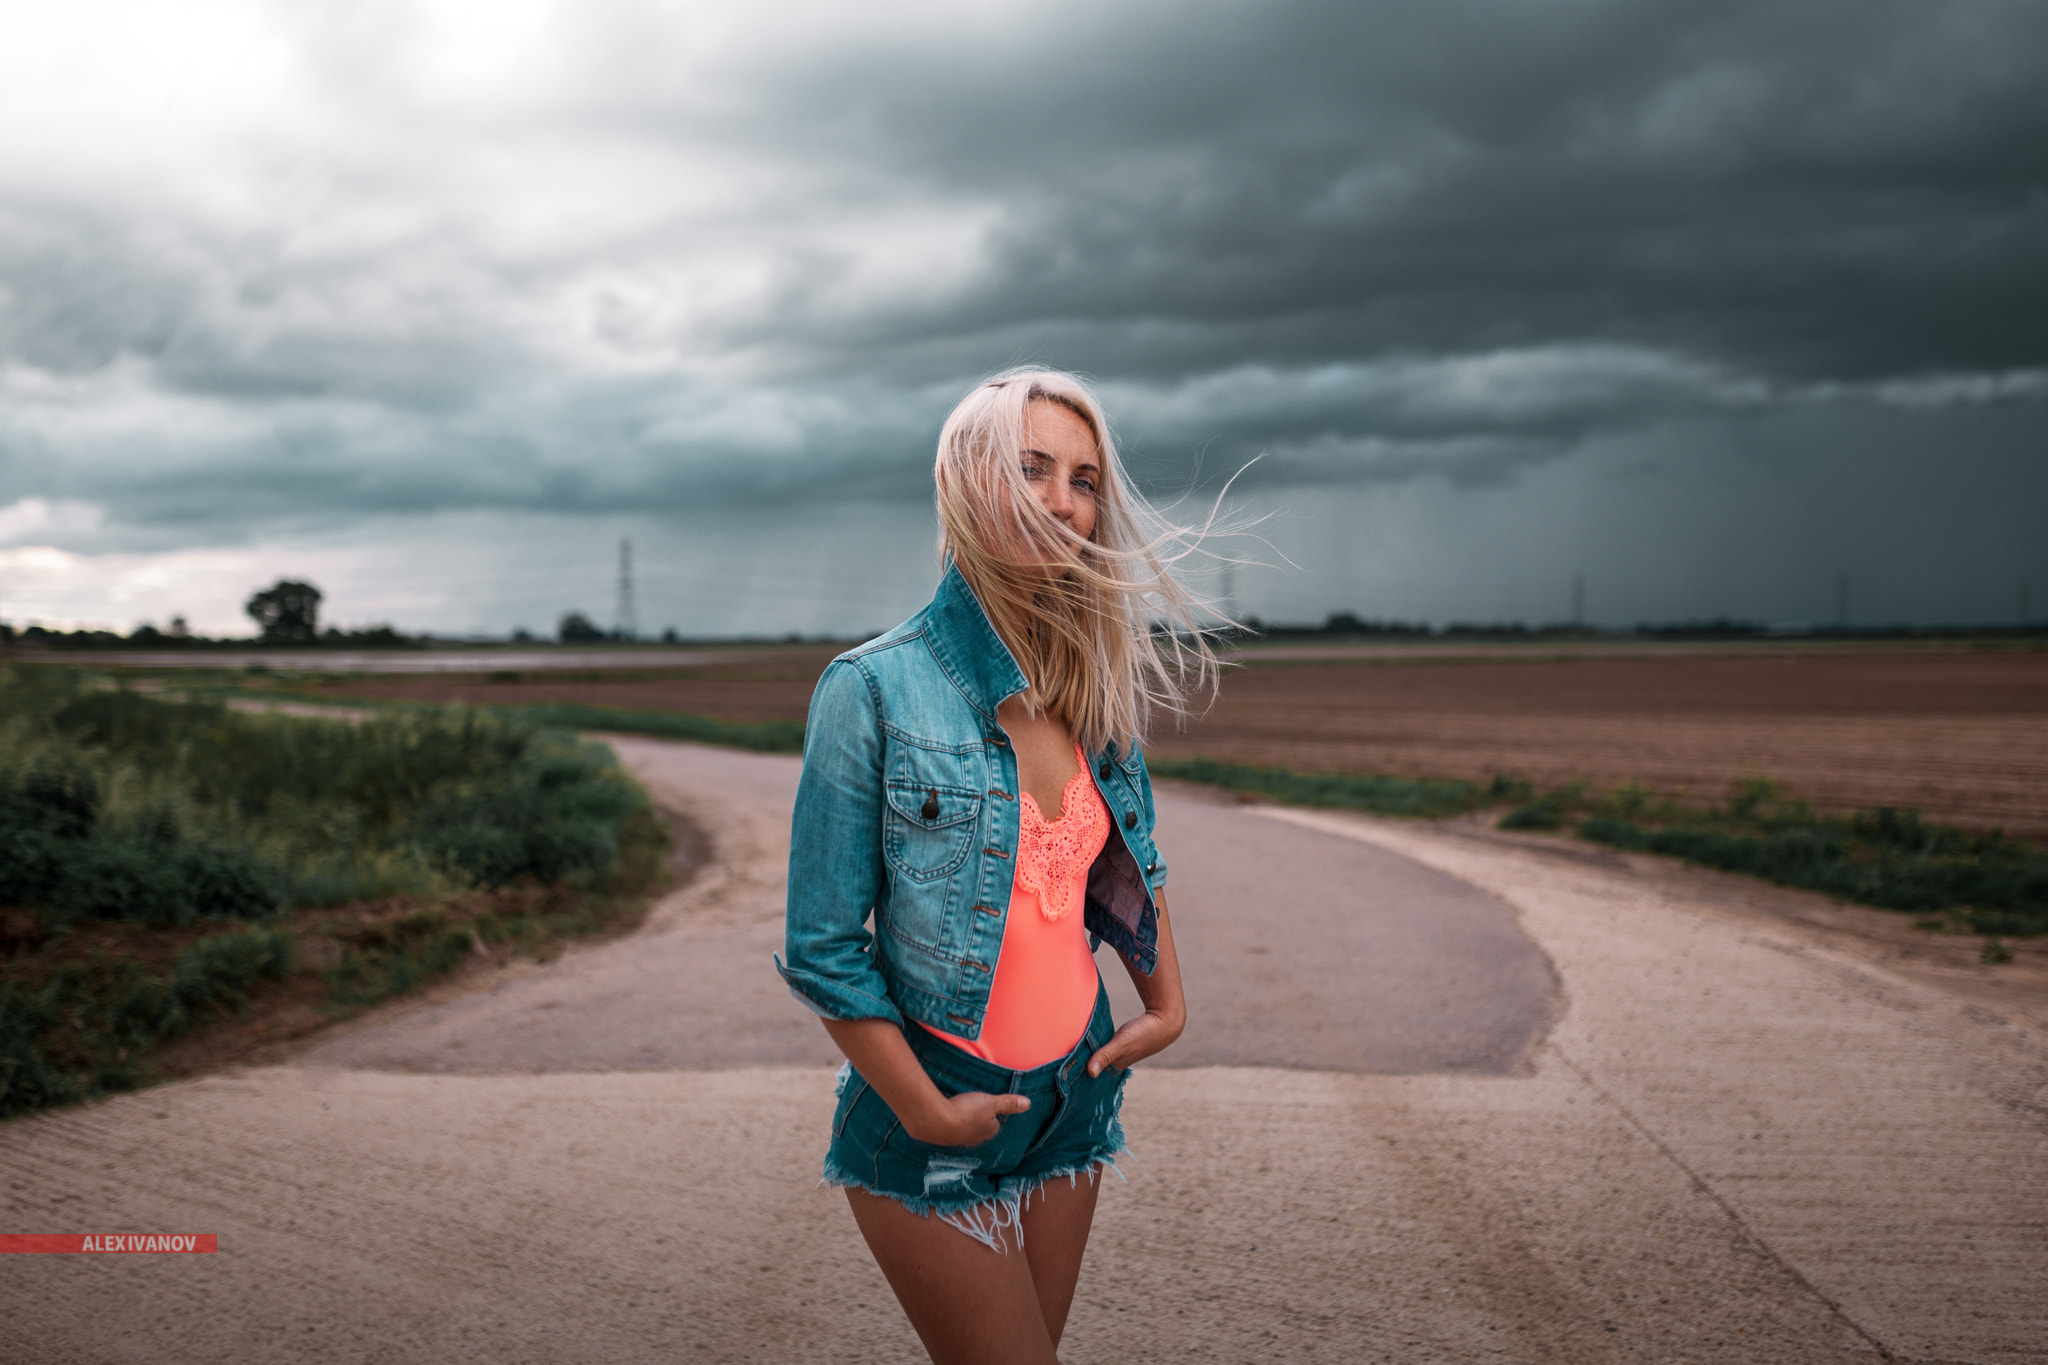 People 2048x1365 women blonde jean shorts cleavage road women outdoors denim hair in face windy hands in pockets hair blowing in the wind denim jacket short shorts tanned standing Alexander Ivanov Daisy Dukes